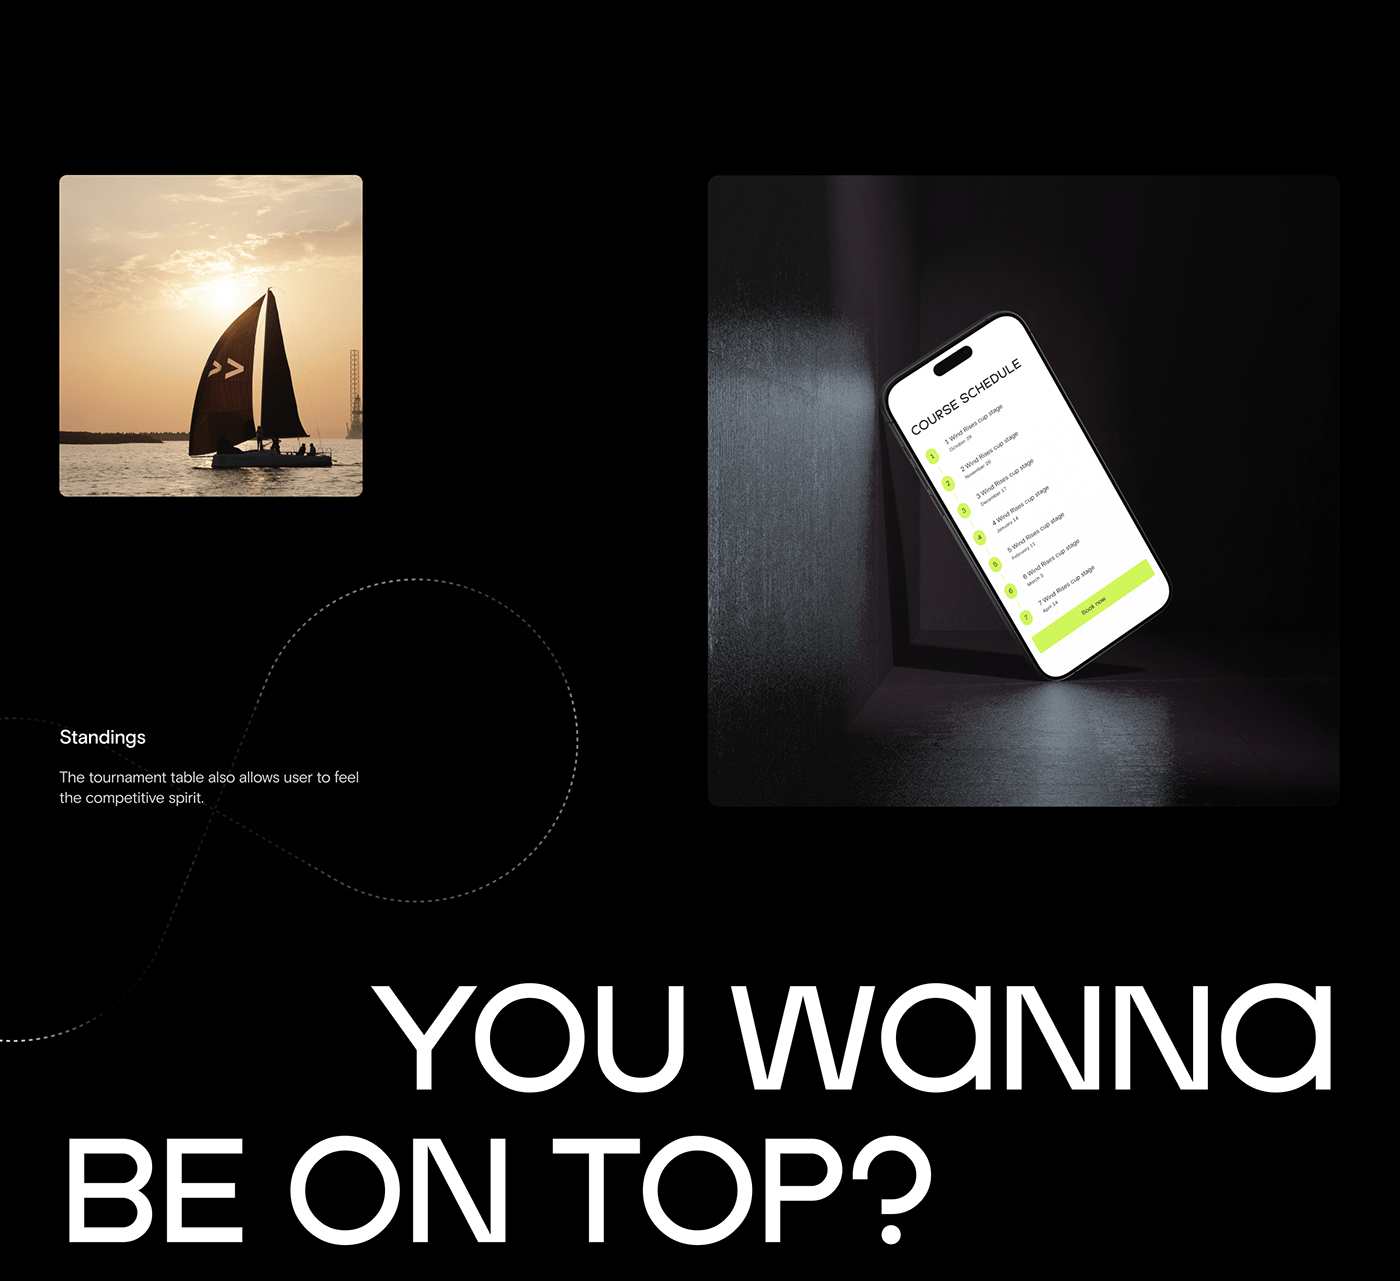 Phone with course schedule, yacht on a sunset